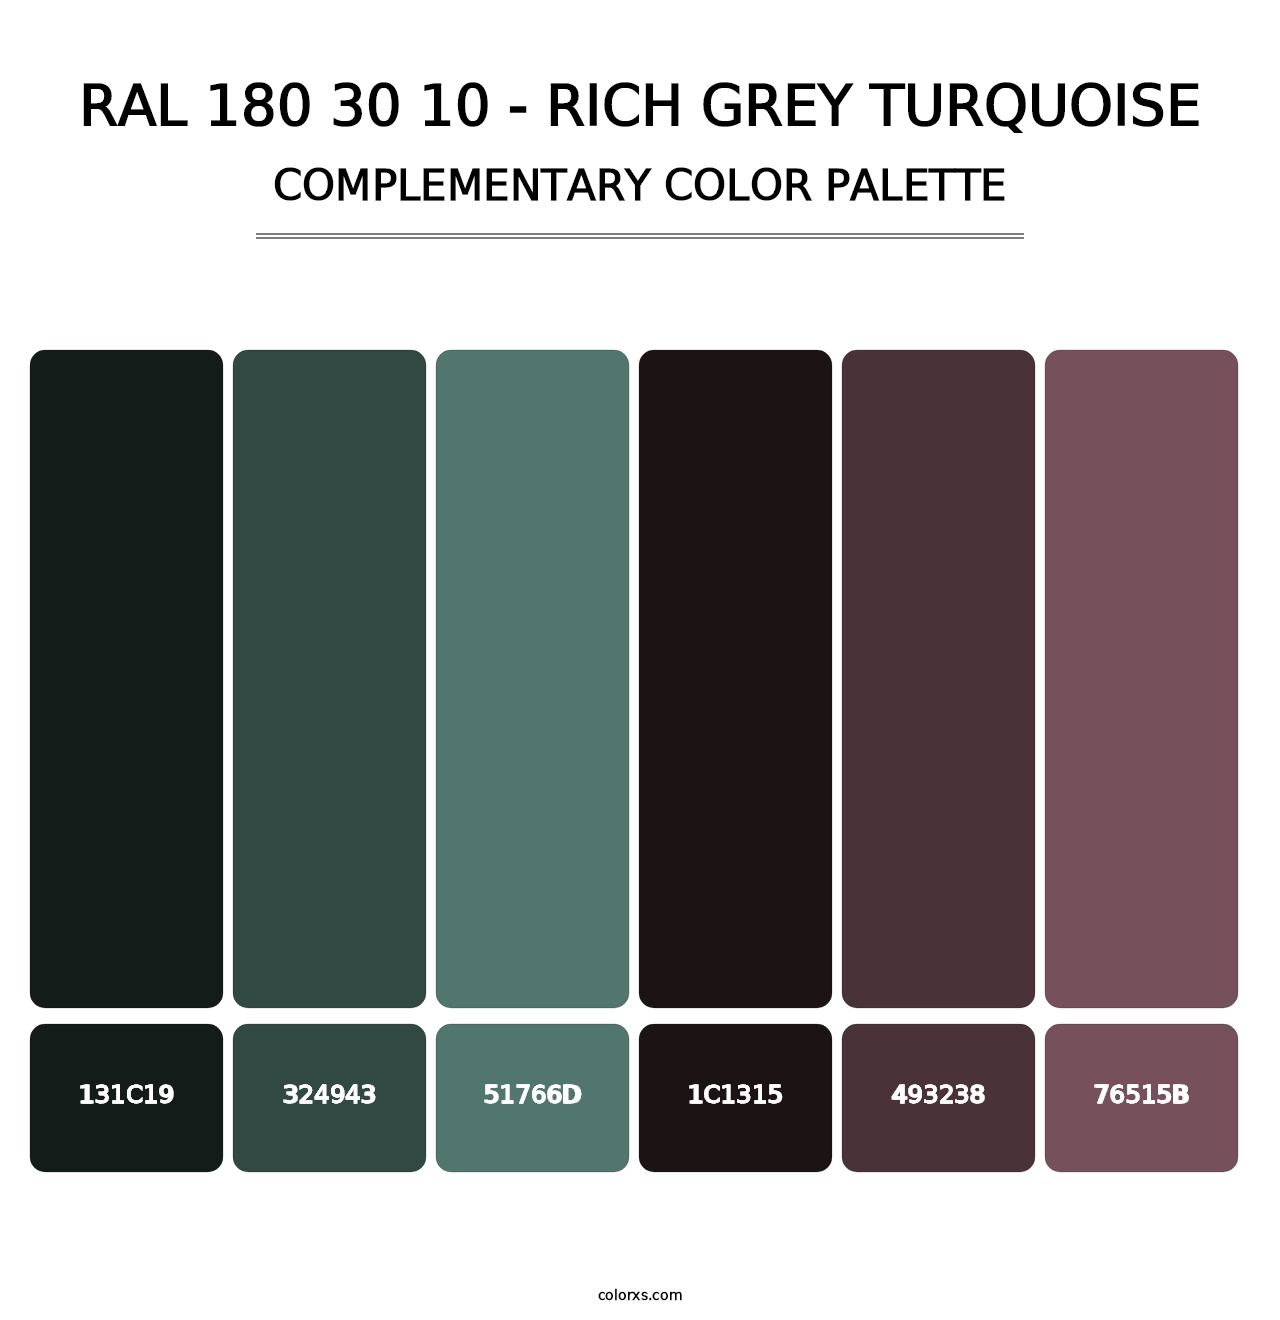 RAL 180 30 10 - Rich Grey Turquoise - Complementary Color Palette